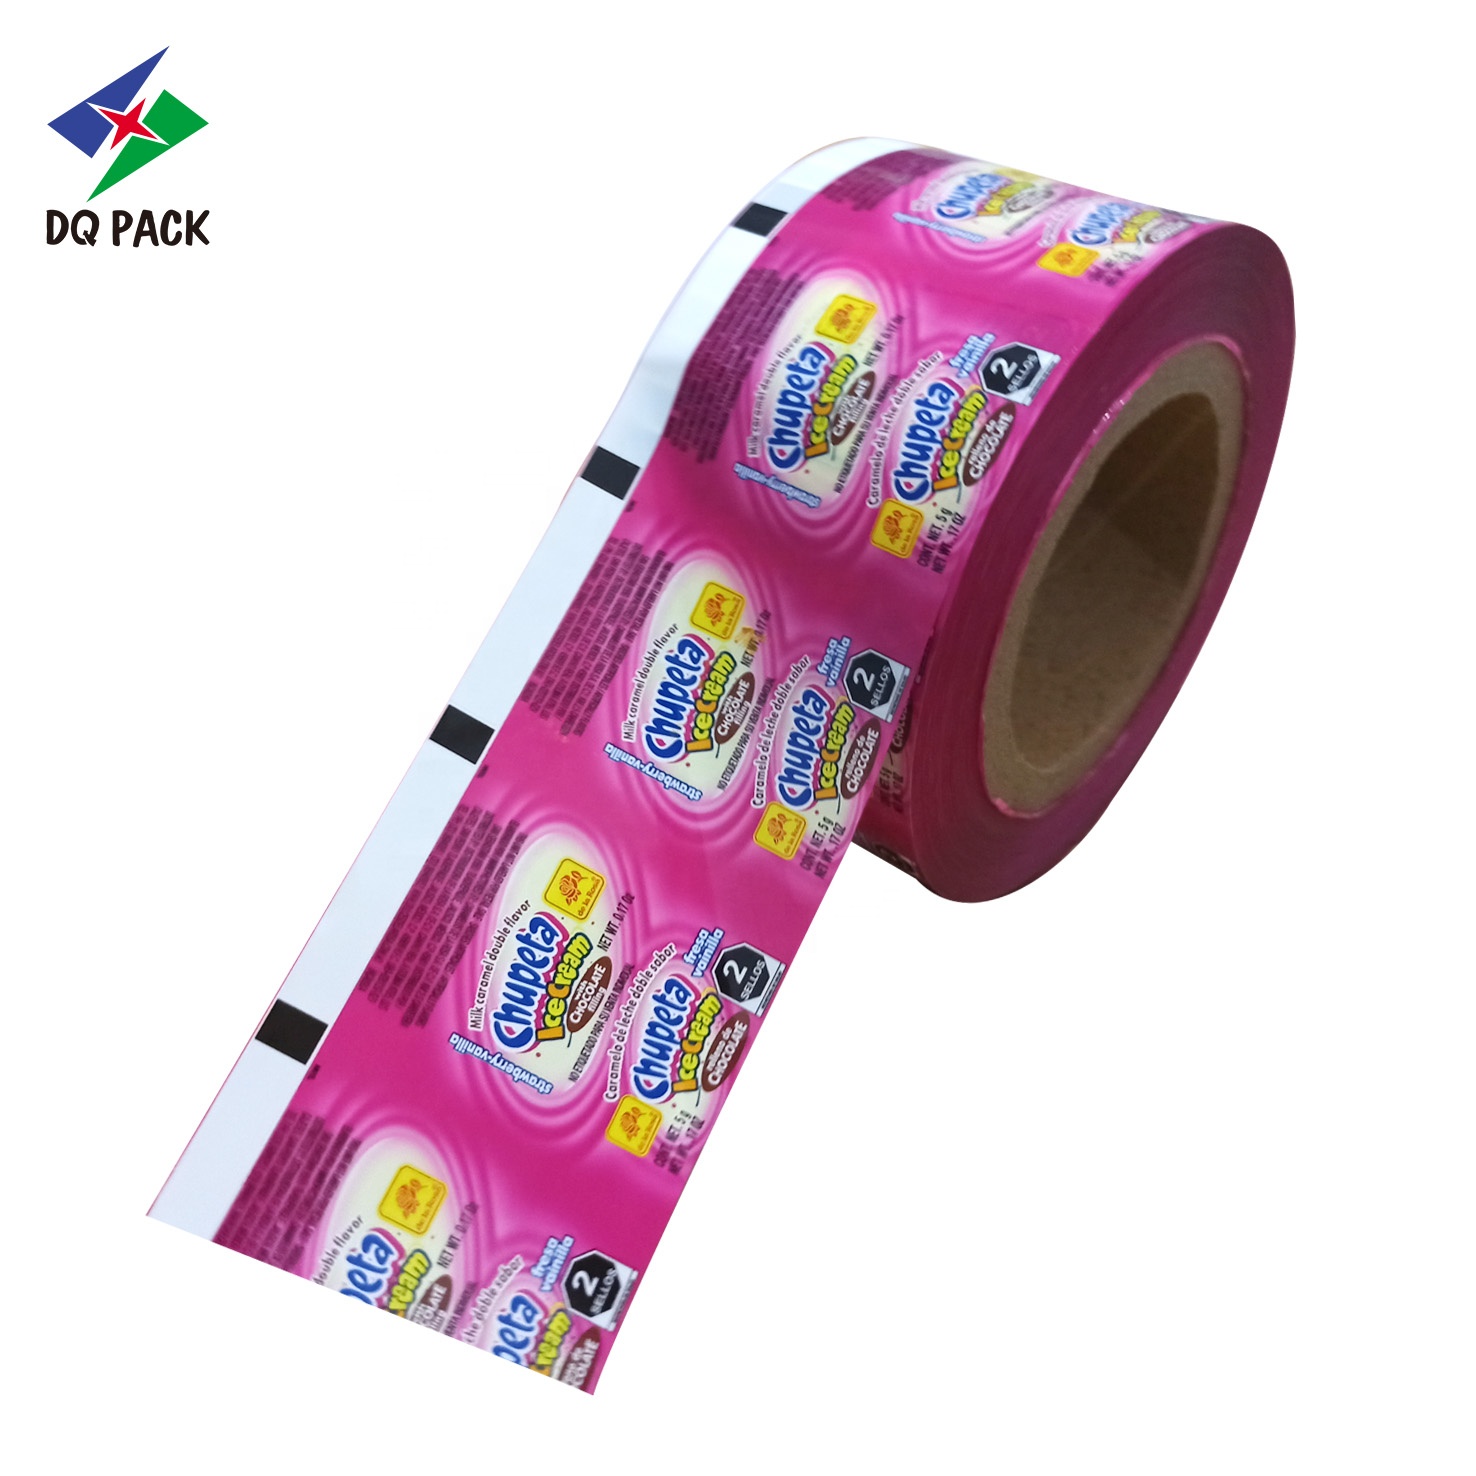 DQ PACK color printing cup sealing film plastic stretch roll film packaging for liquid tea sugar